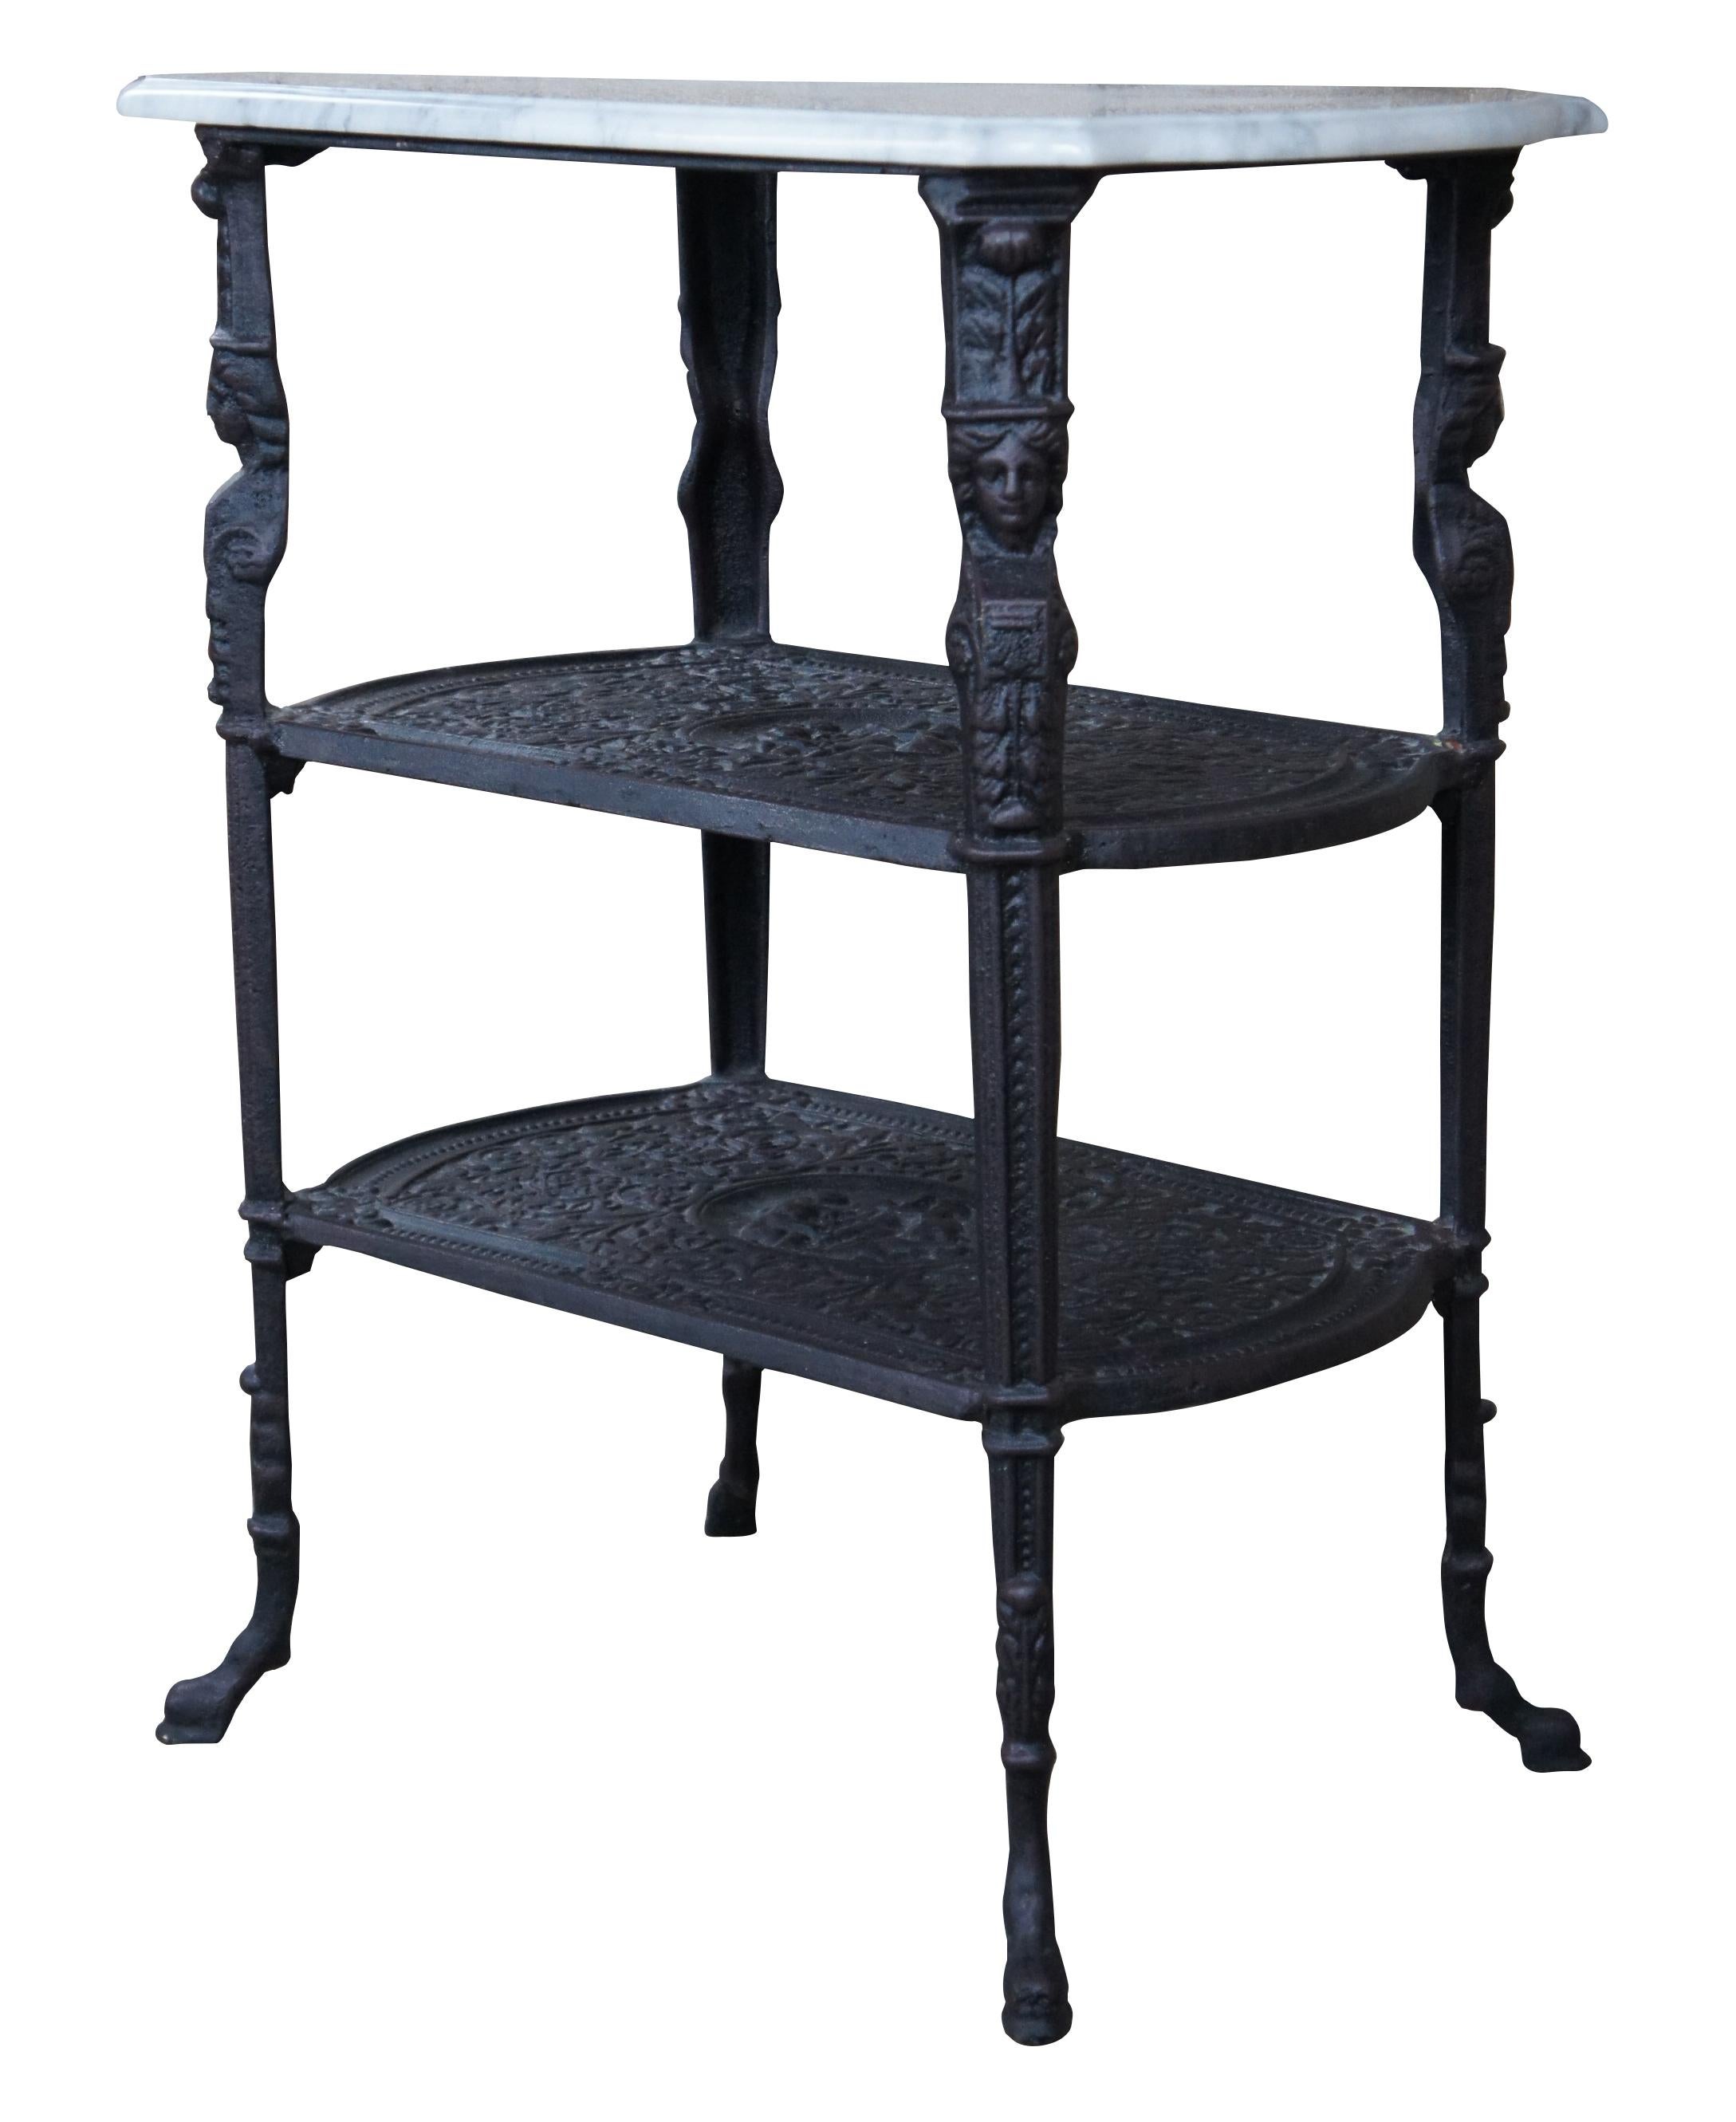 Vintage cast iron and marble top parlor side table or plant stand featuring three tiers with Egyptian Caryatid columns, cameos of cherubs and hooved feat. Very heavy. Measure: 29